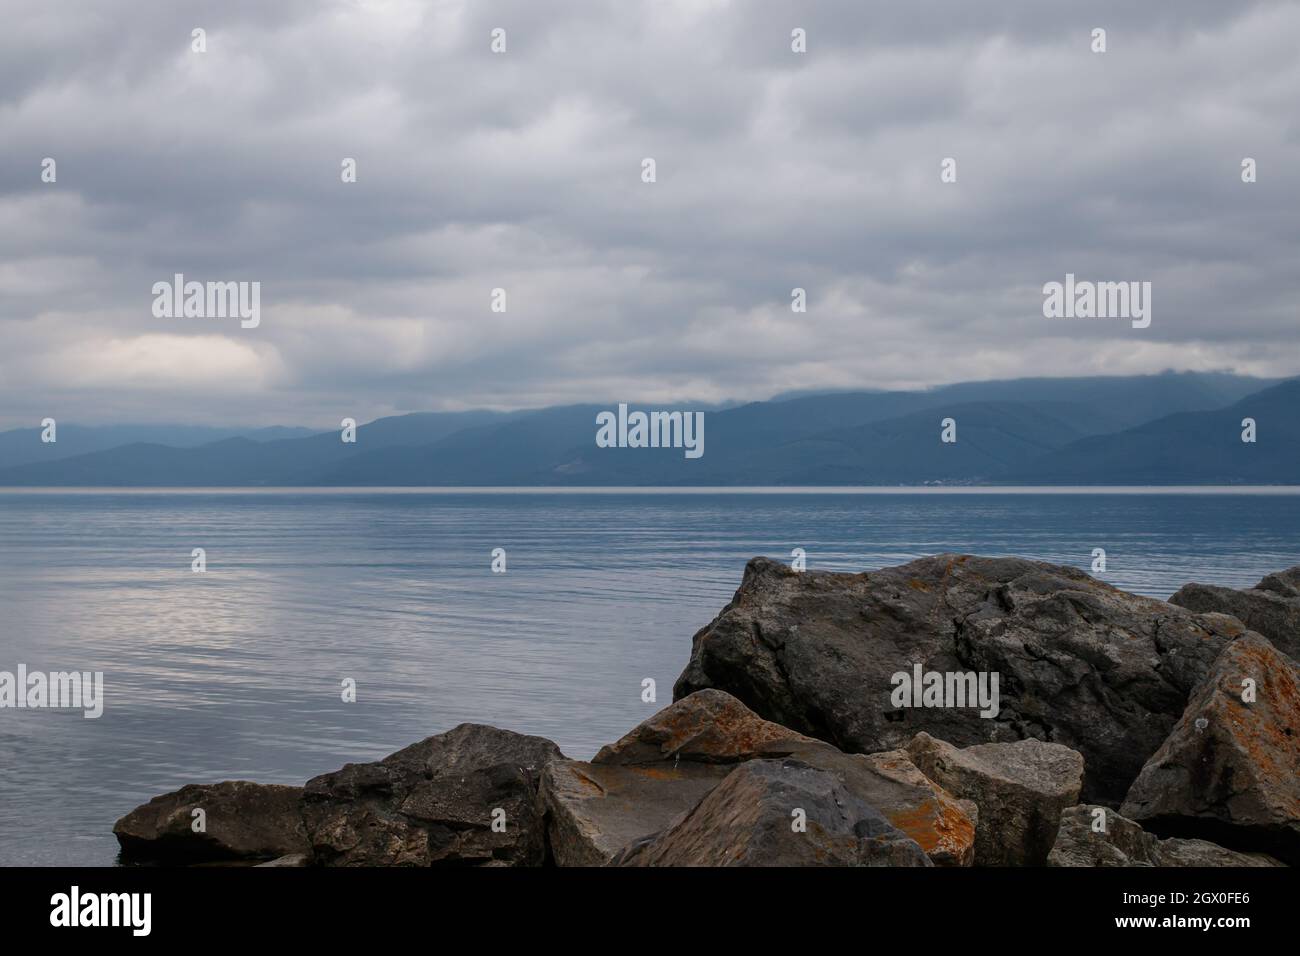 Lake Baikal In Cloudy Weather, Irkutsk Region, Russia. In The Foreground Are Large Stones. Stock Photo